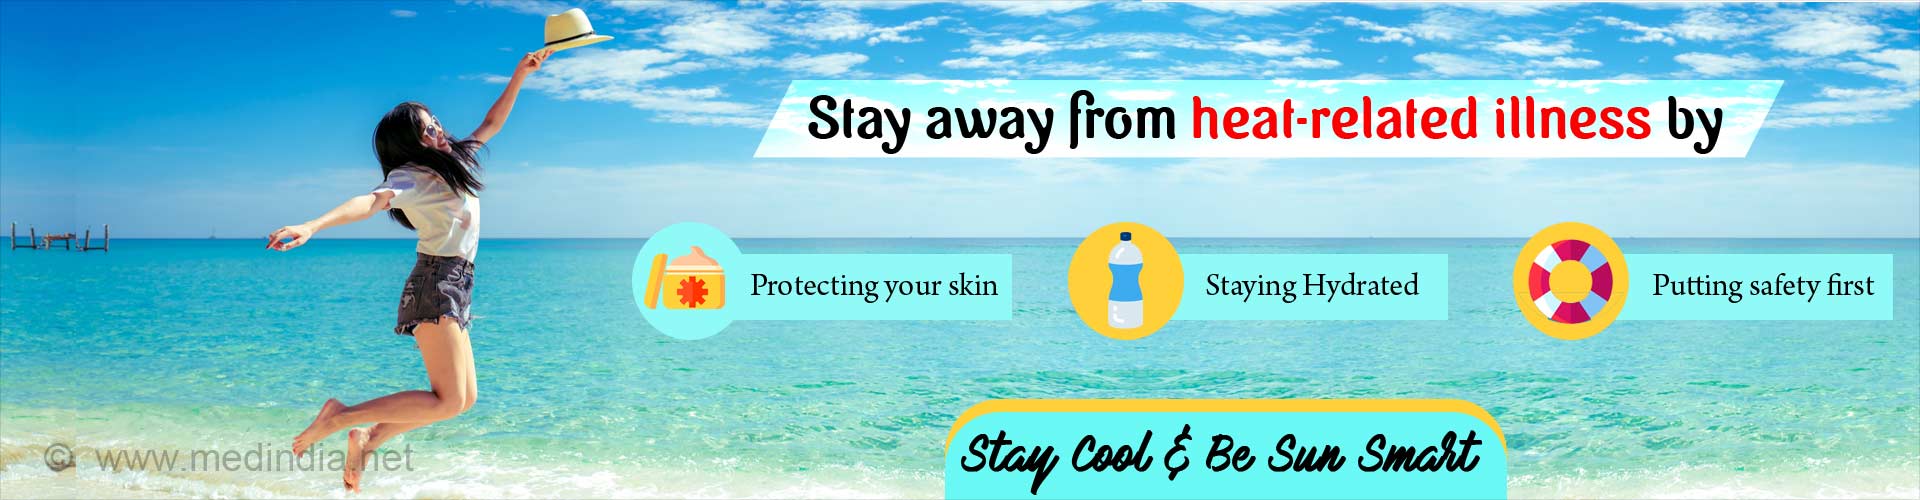 Stay away from heat-related illness by protecting your skin, staying hydrated and putting safety first. Stay cool and be sun smart.